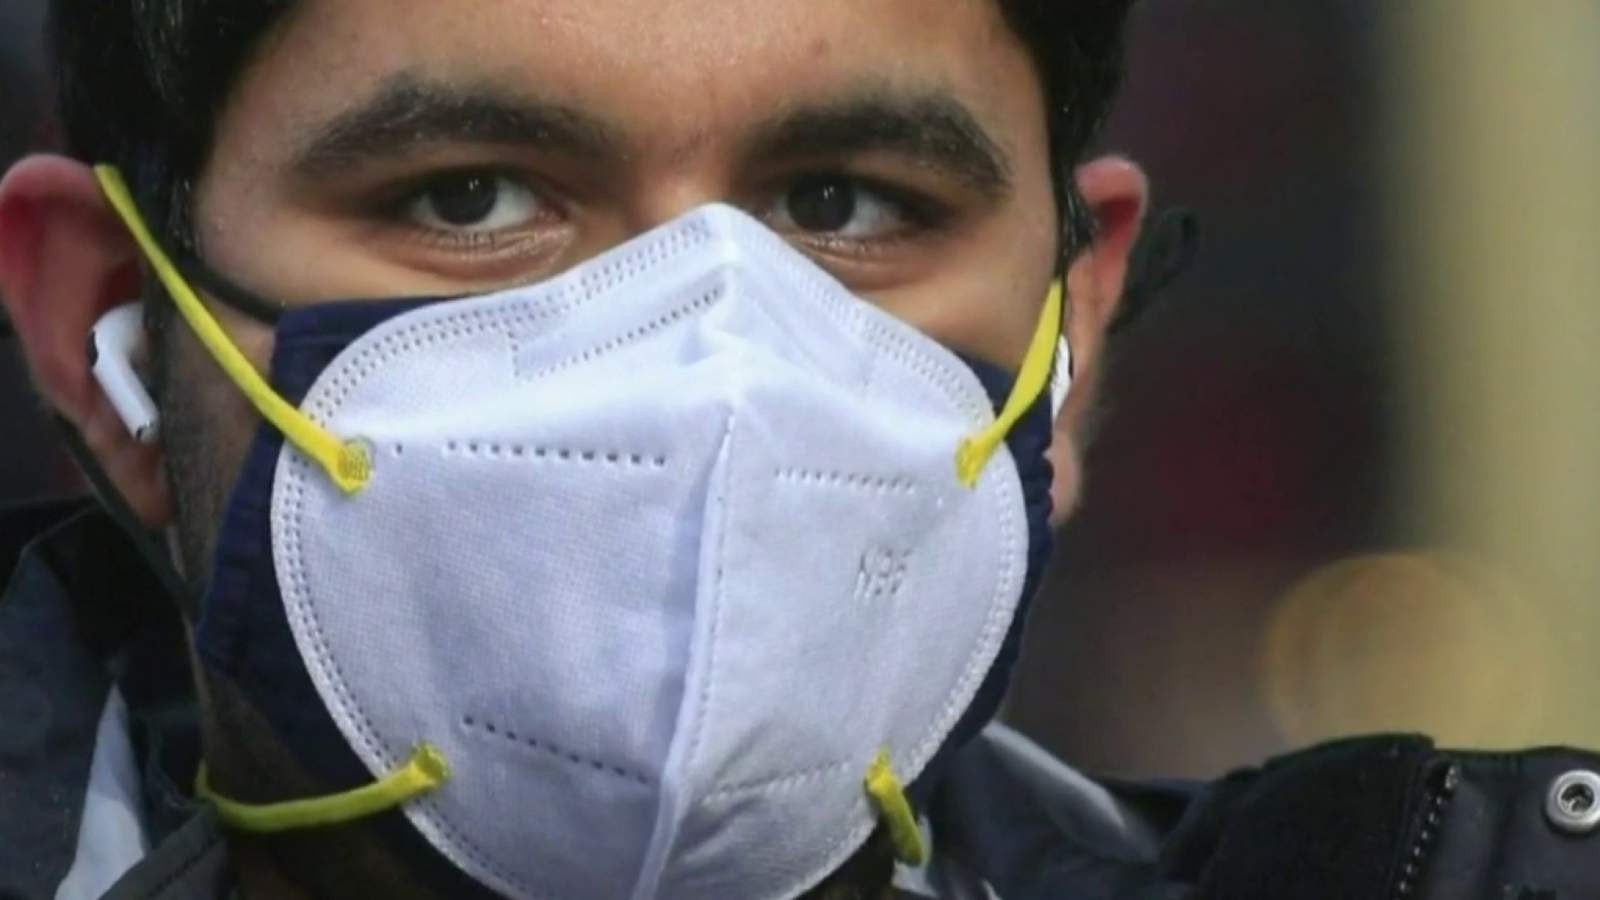 Experts recommend quality masks or double masking in higher risk situations